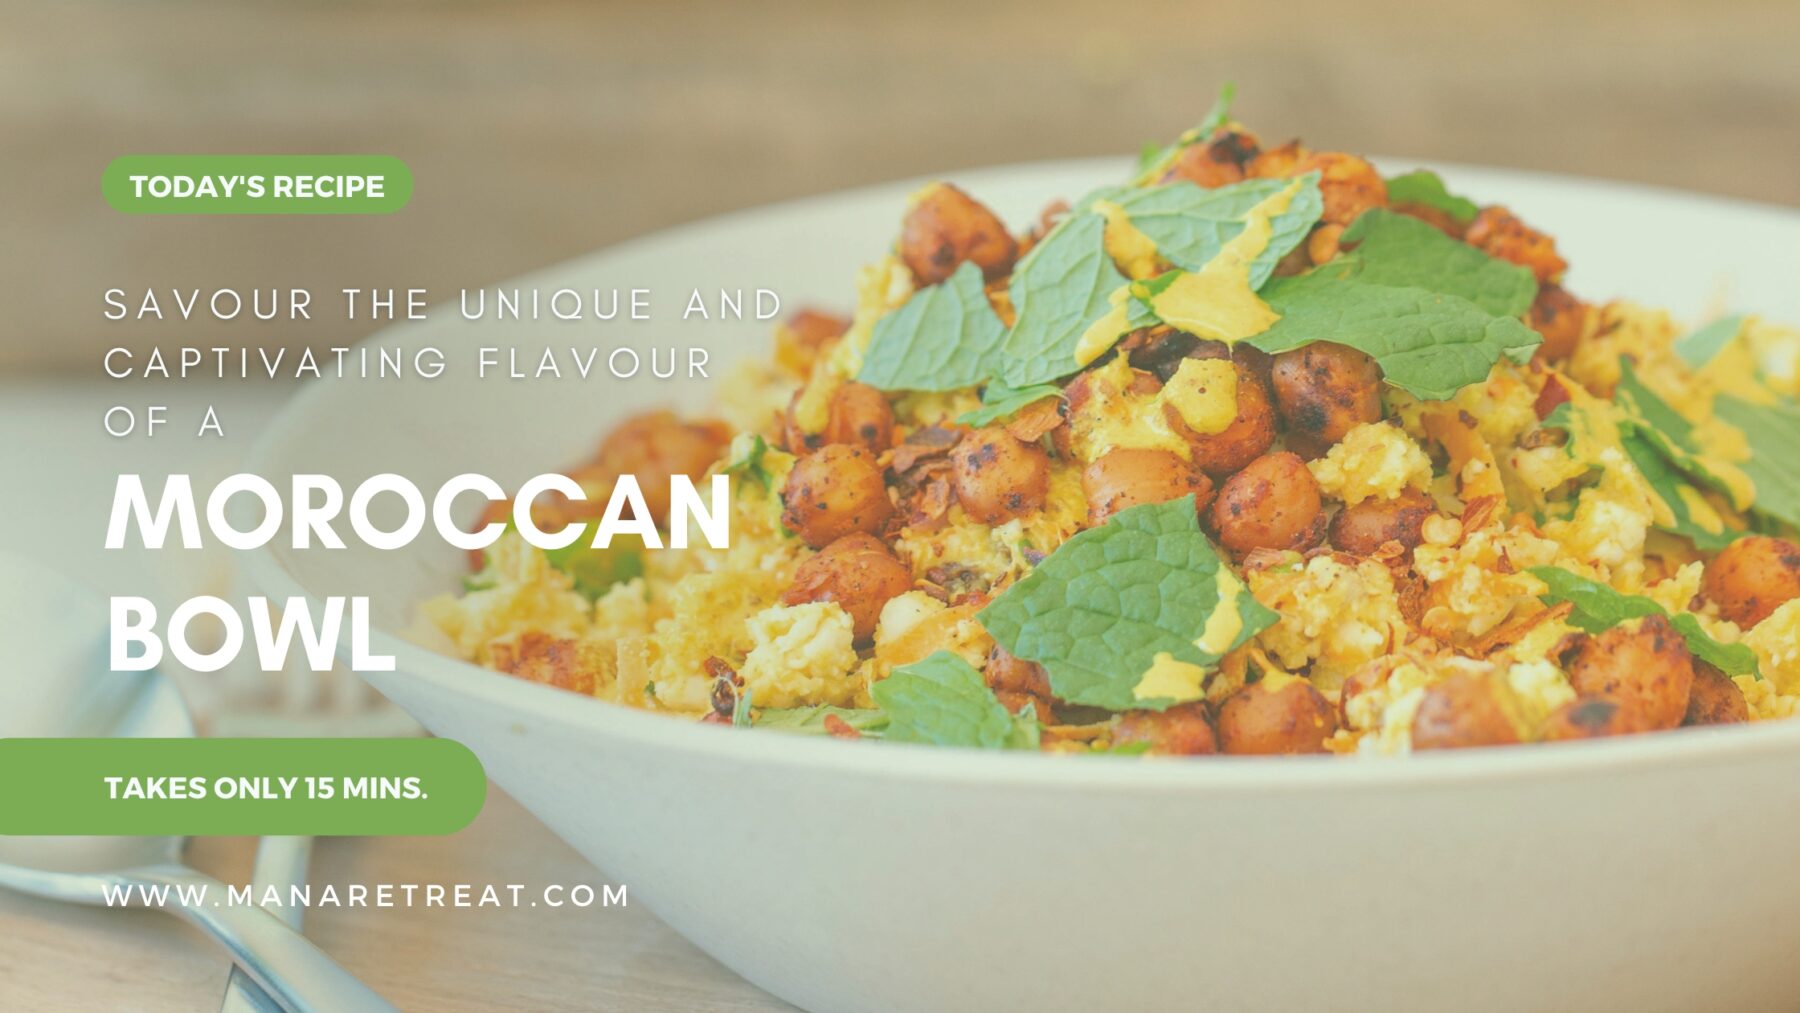 Savor the unique and captivating flavor of a Moroccan bowl that will leave you wanting more